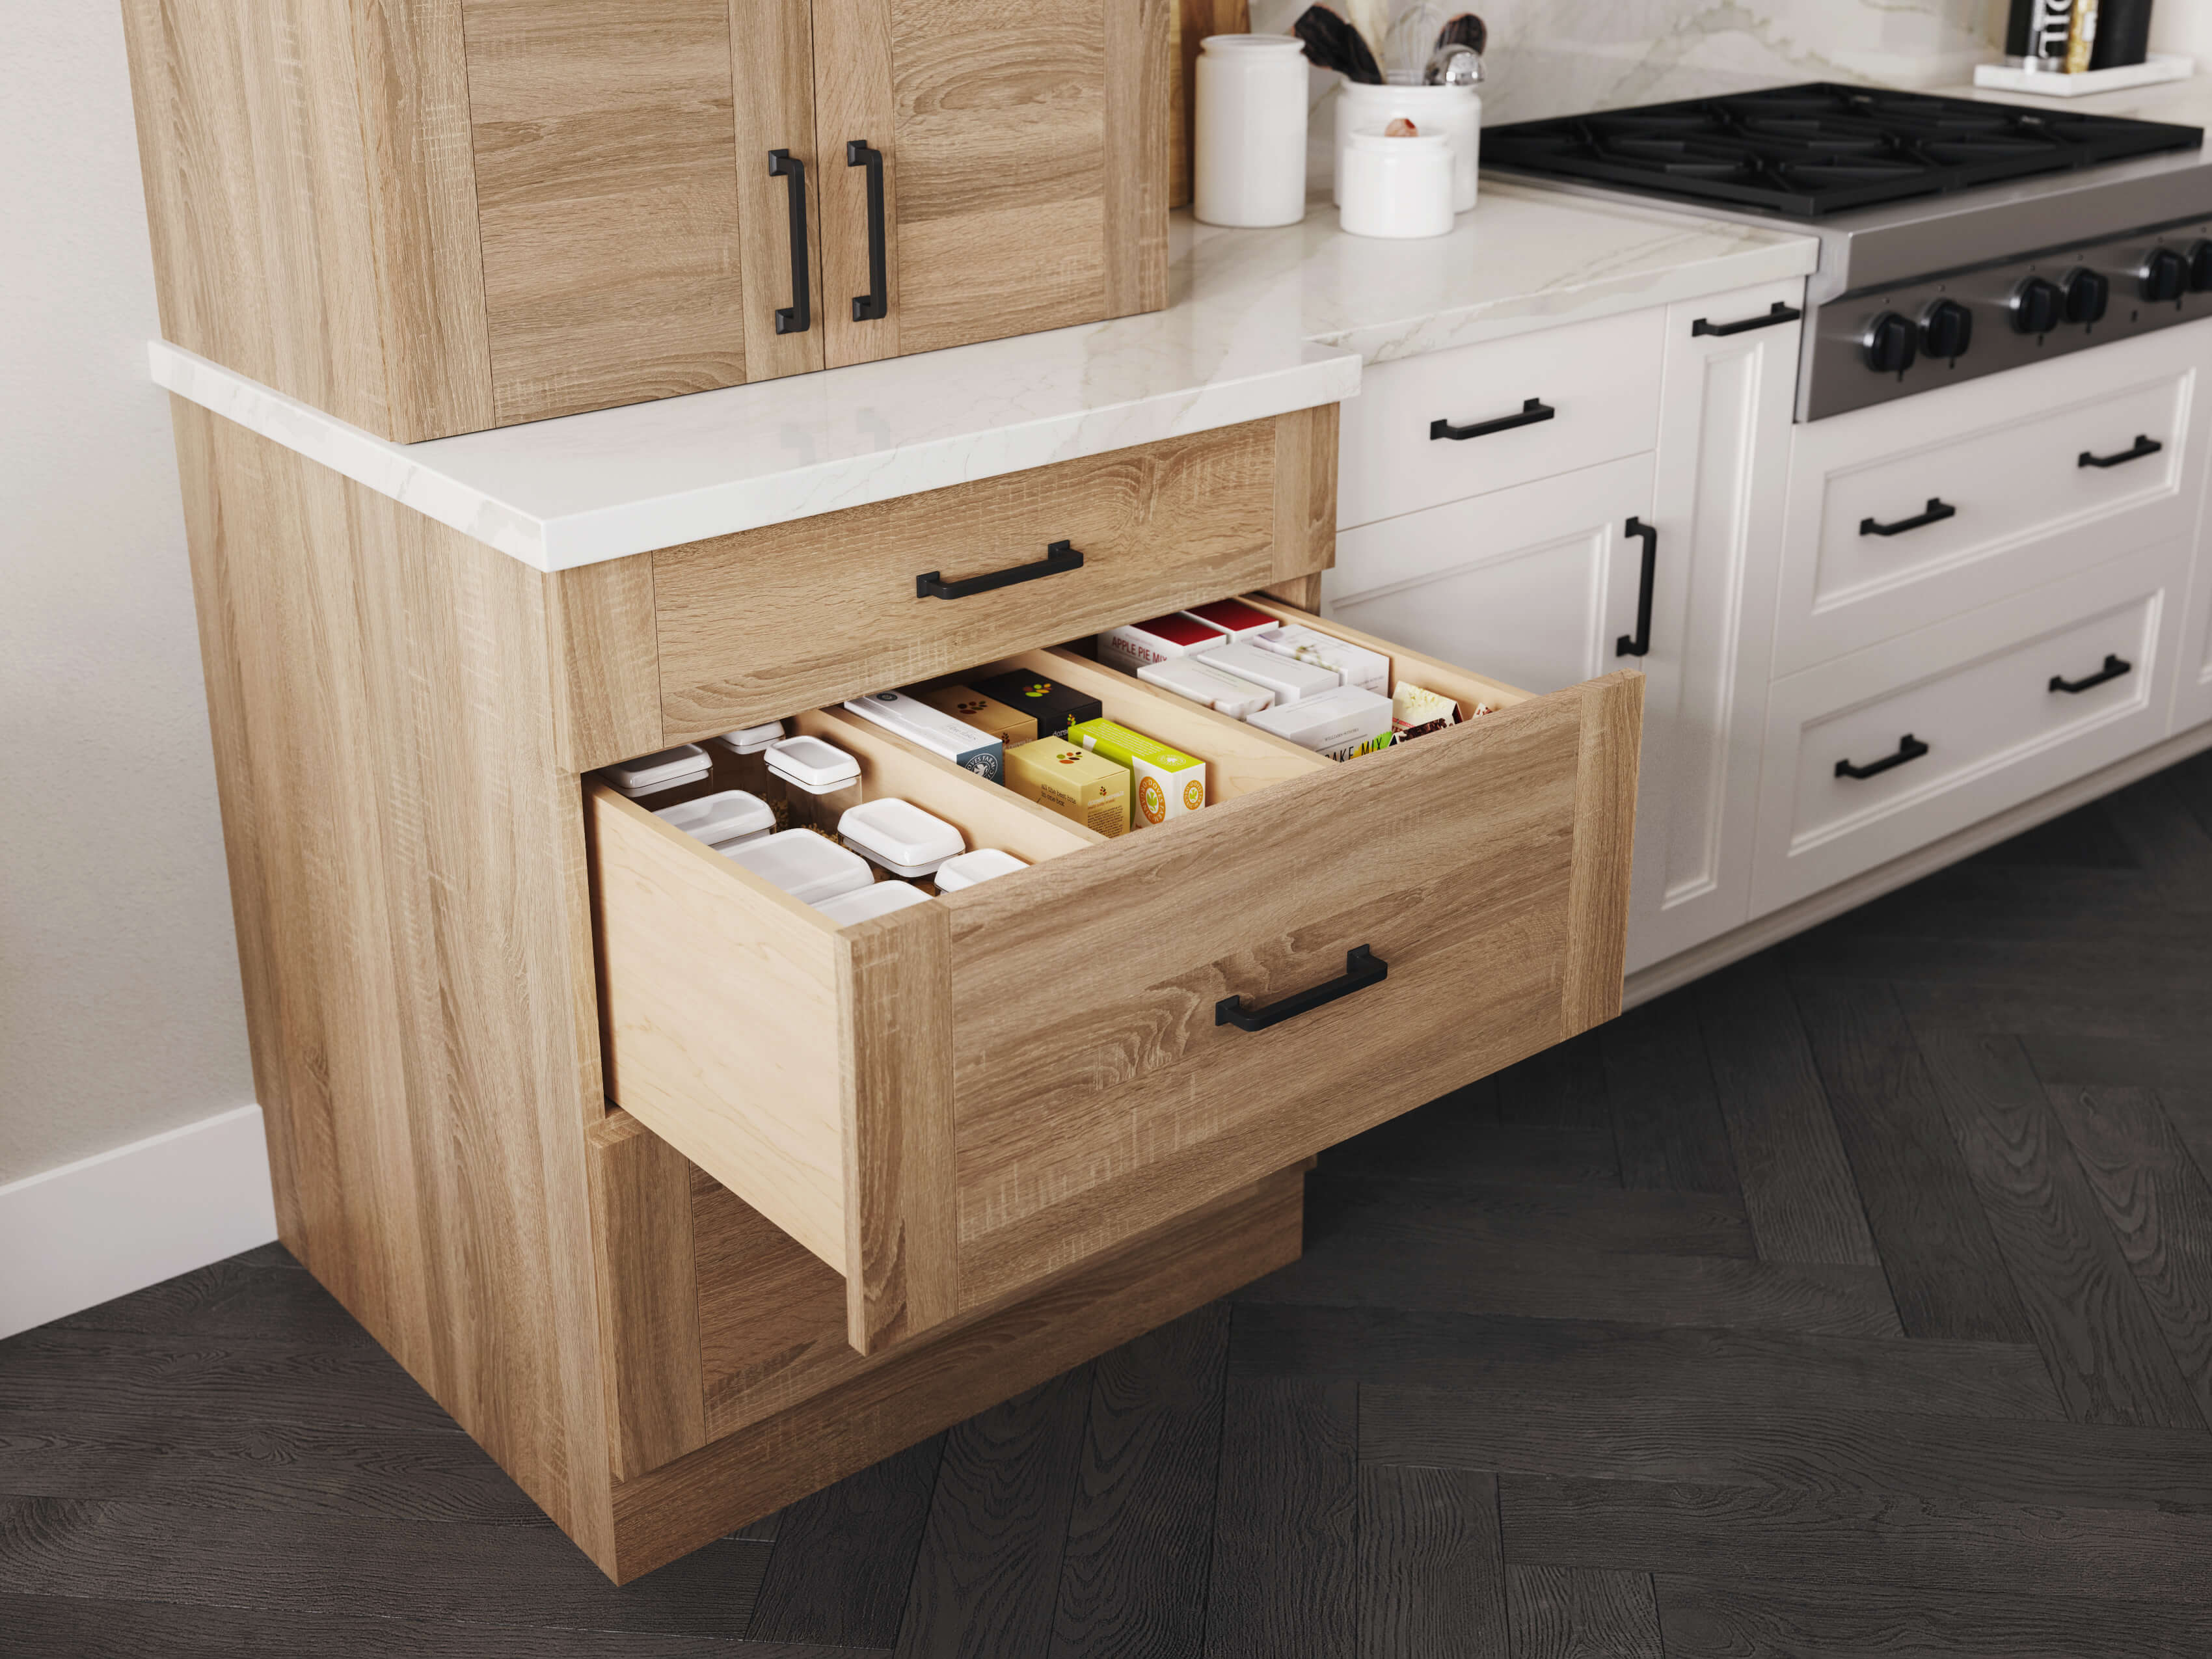 A deep kitchen drawer with dividers for organized pantry storage.